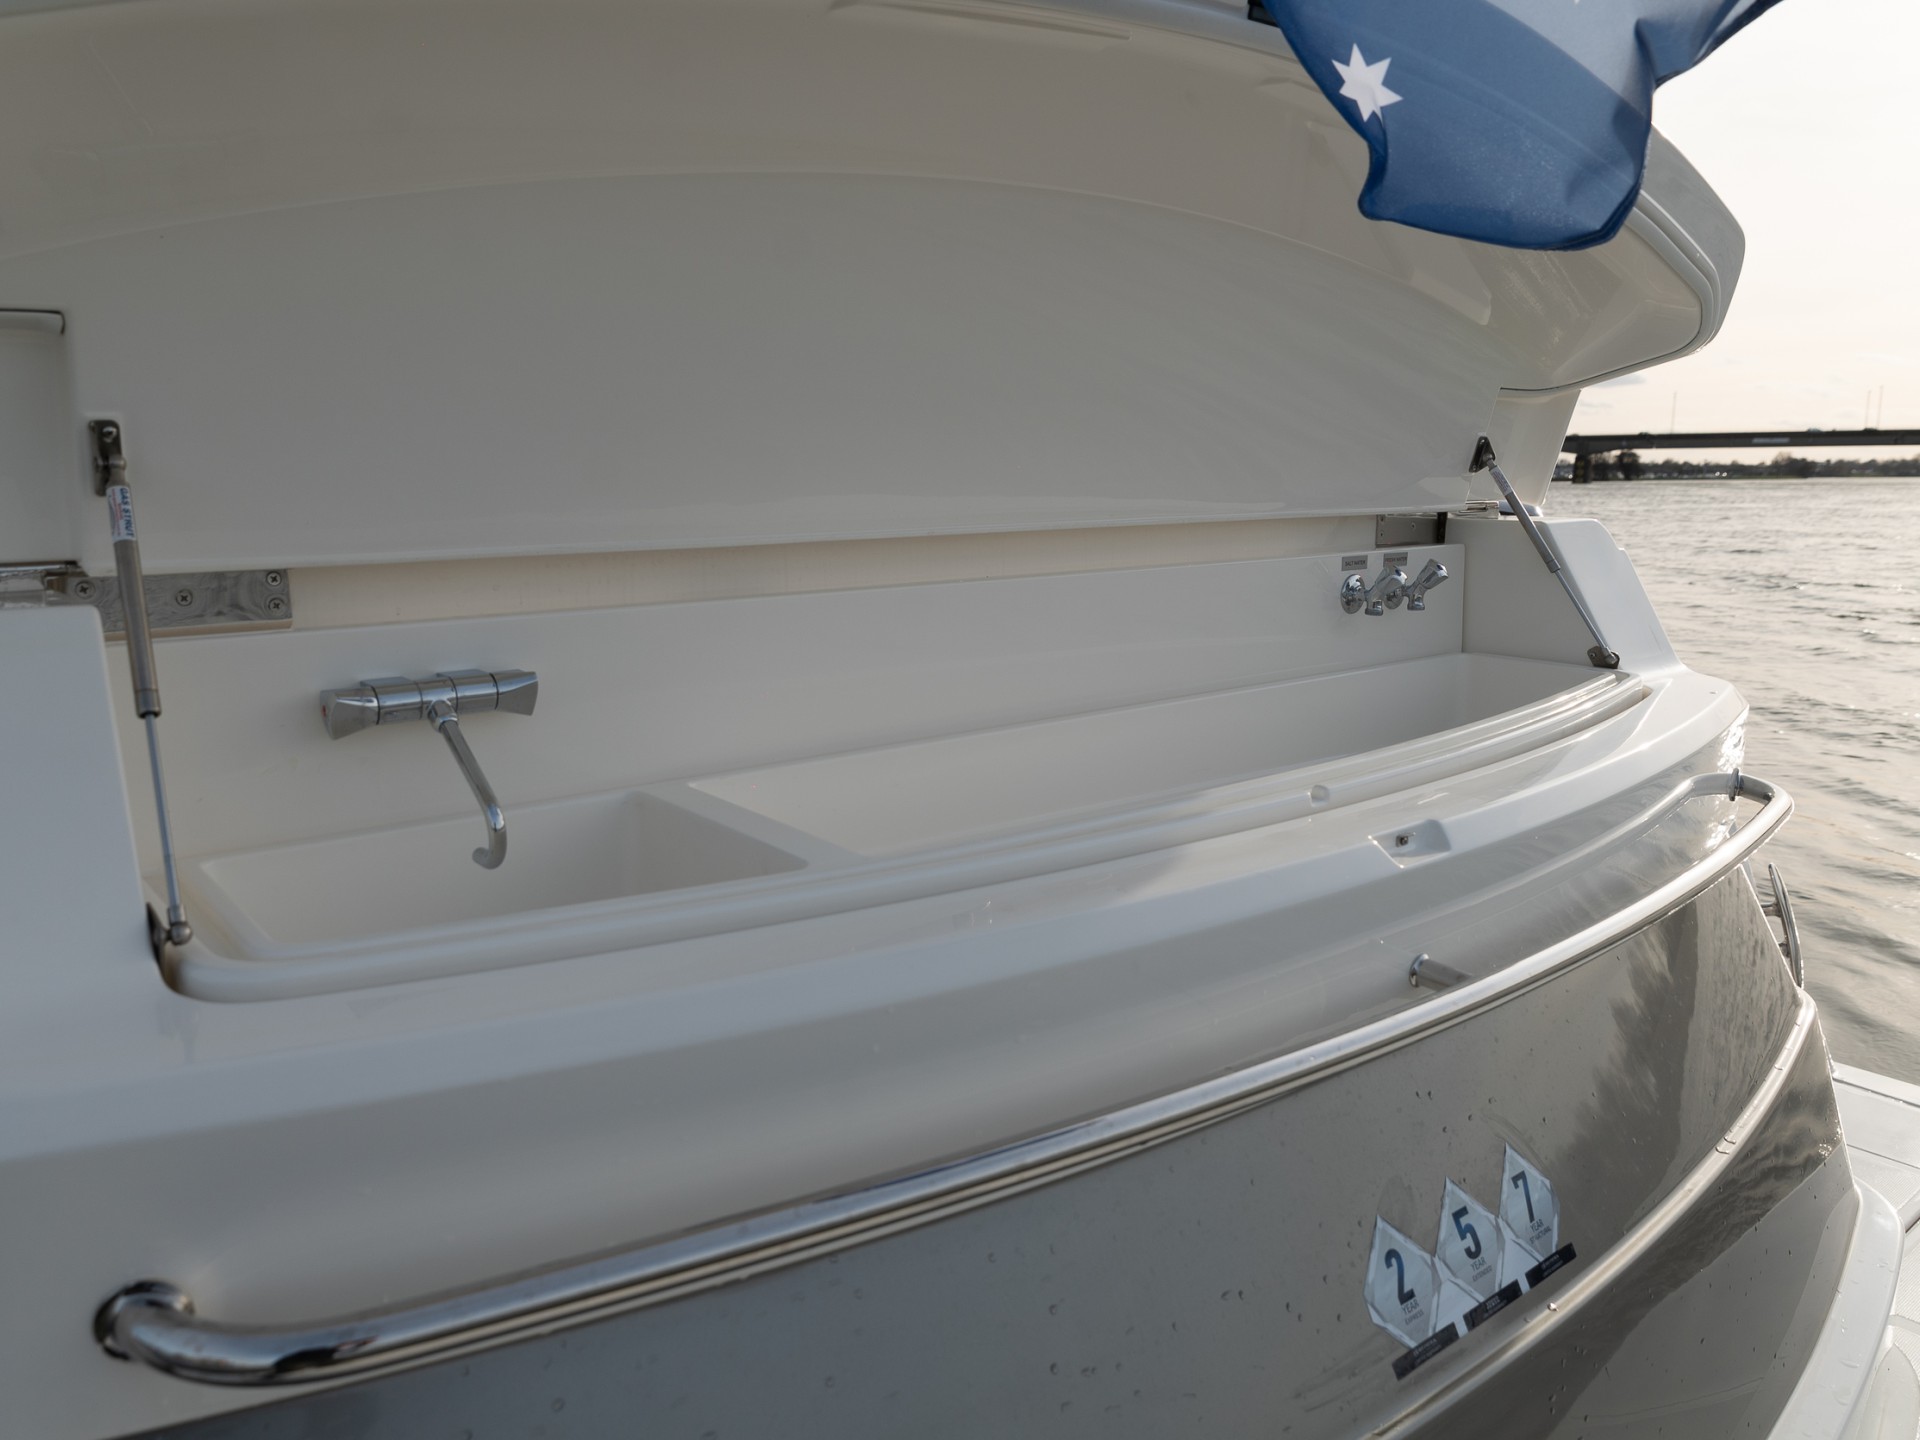 Riviera 4800 SPORT YACHT SERIES II - PLATINUM EDITION -New Yacht - Ready For Delivery!